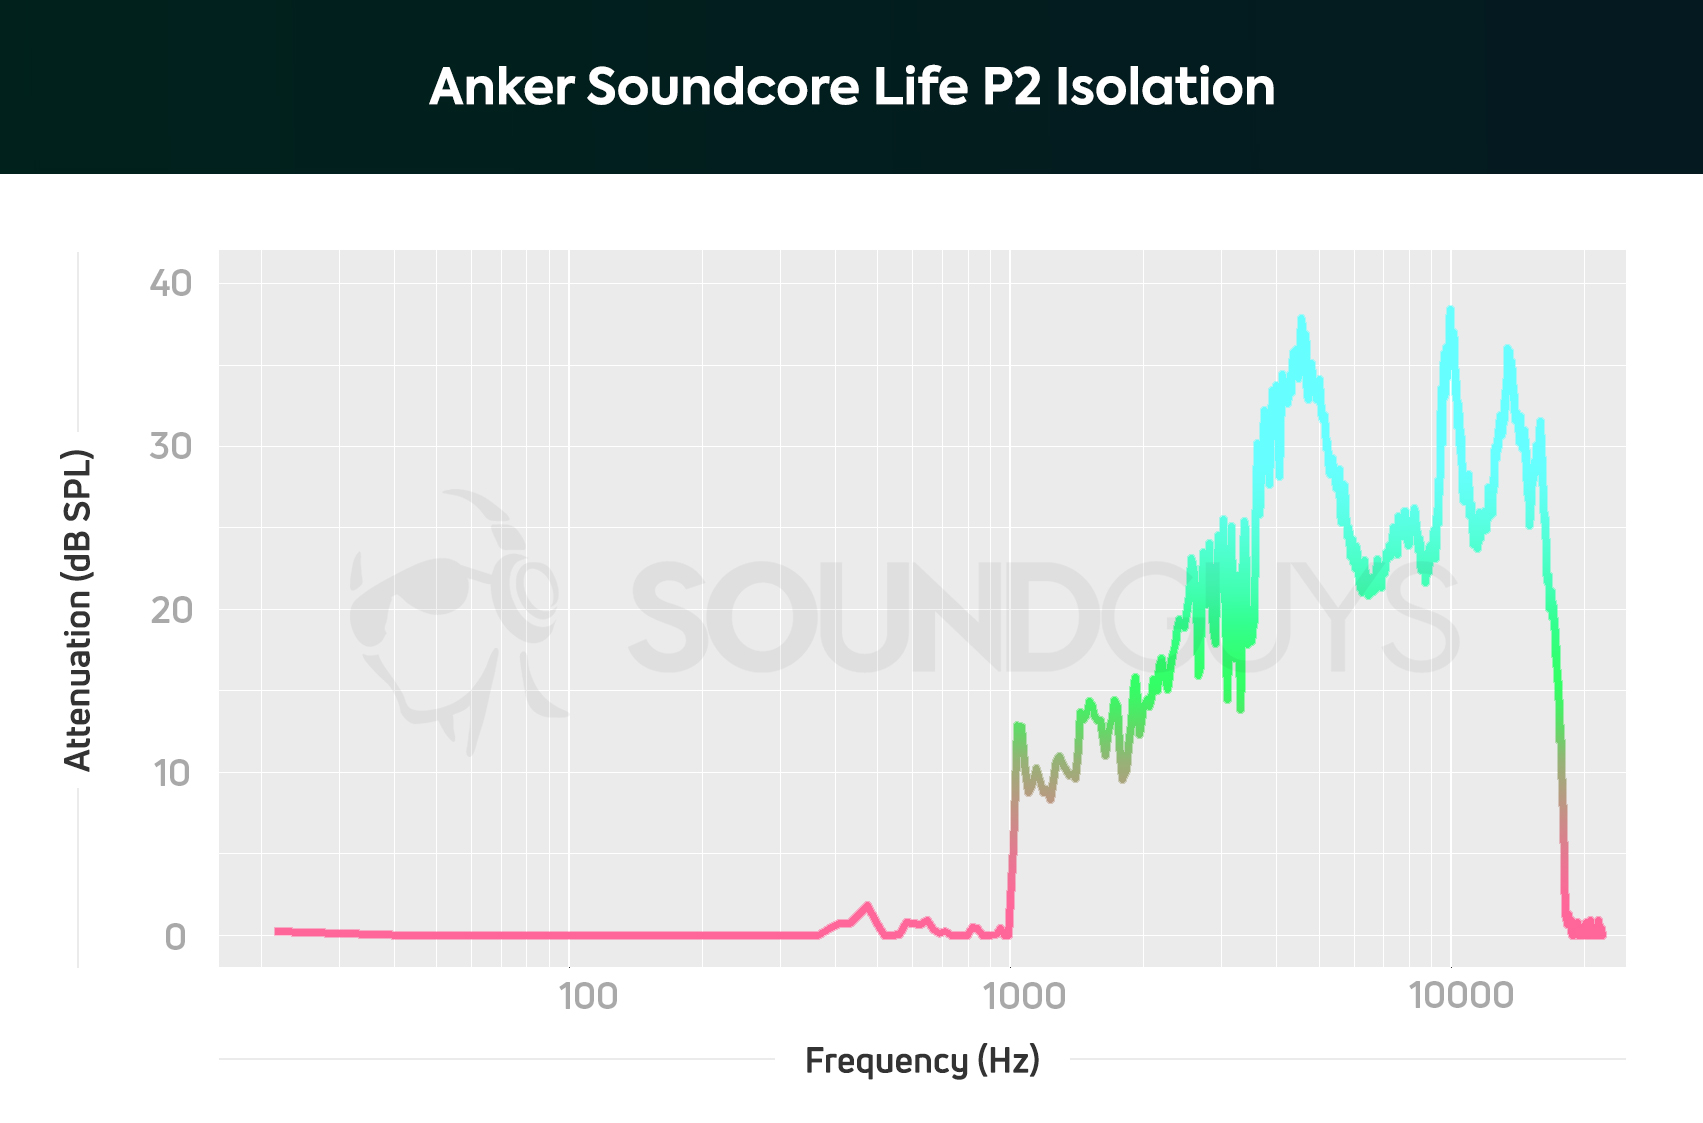 A chart depicts the Anker Soundcore Life P2 isolation.